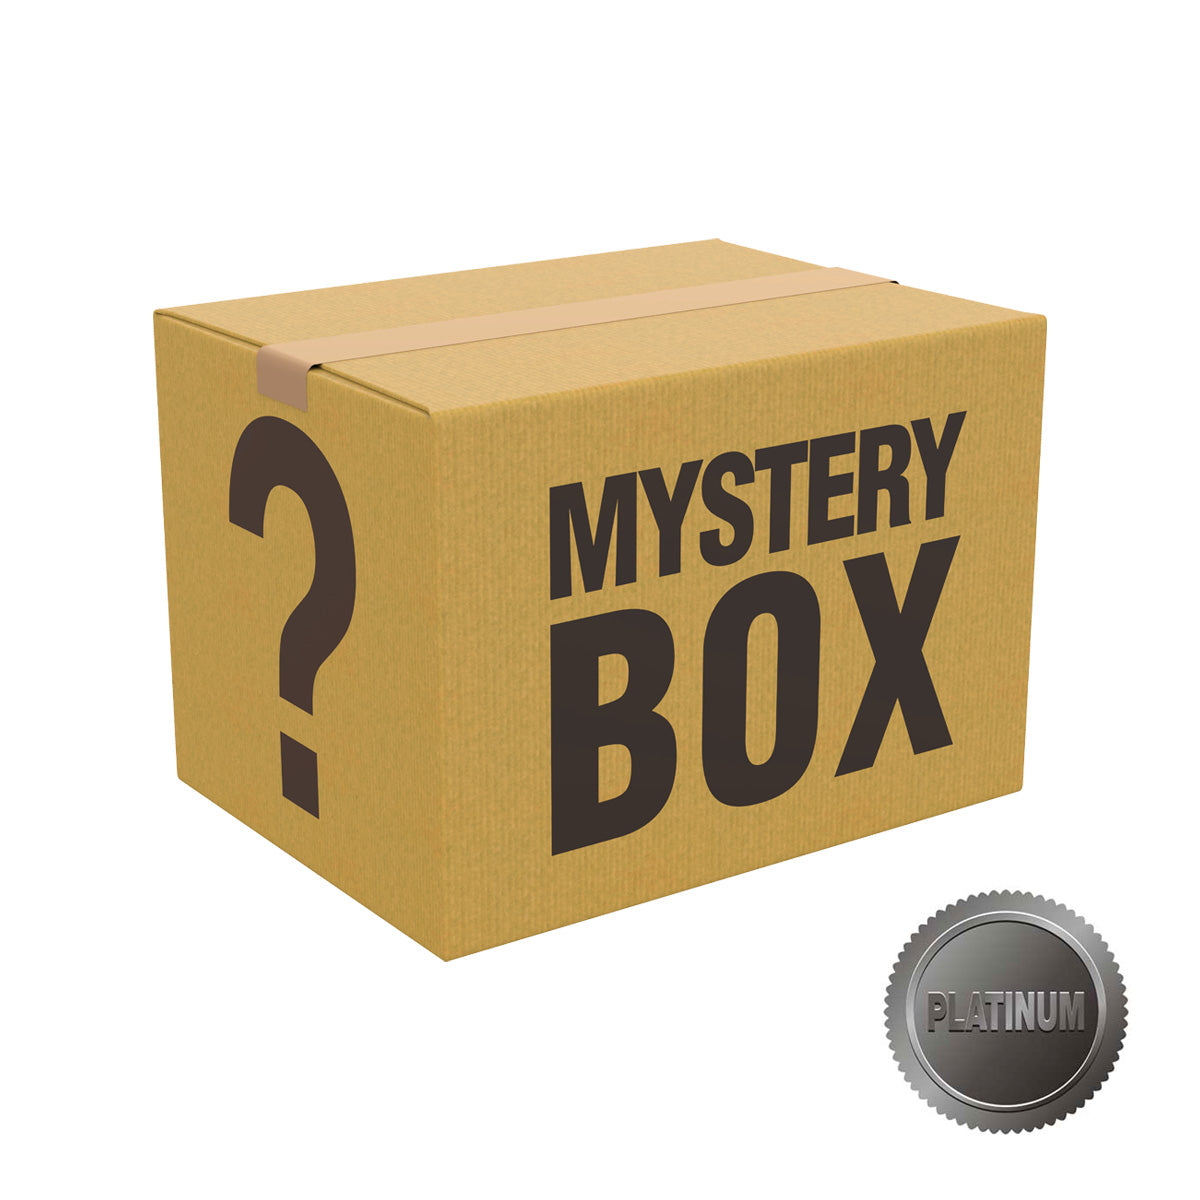 (Platinum) Mystery Box with $150 Value